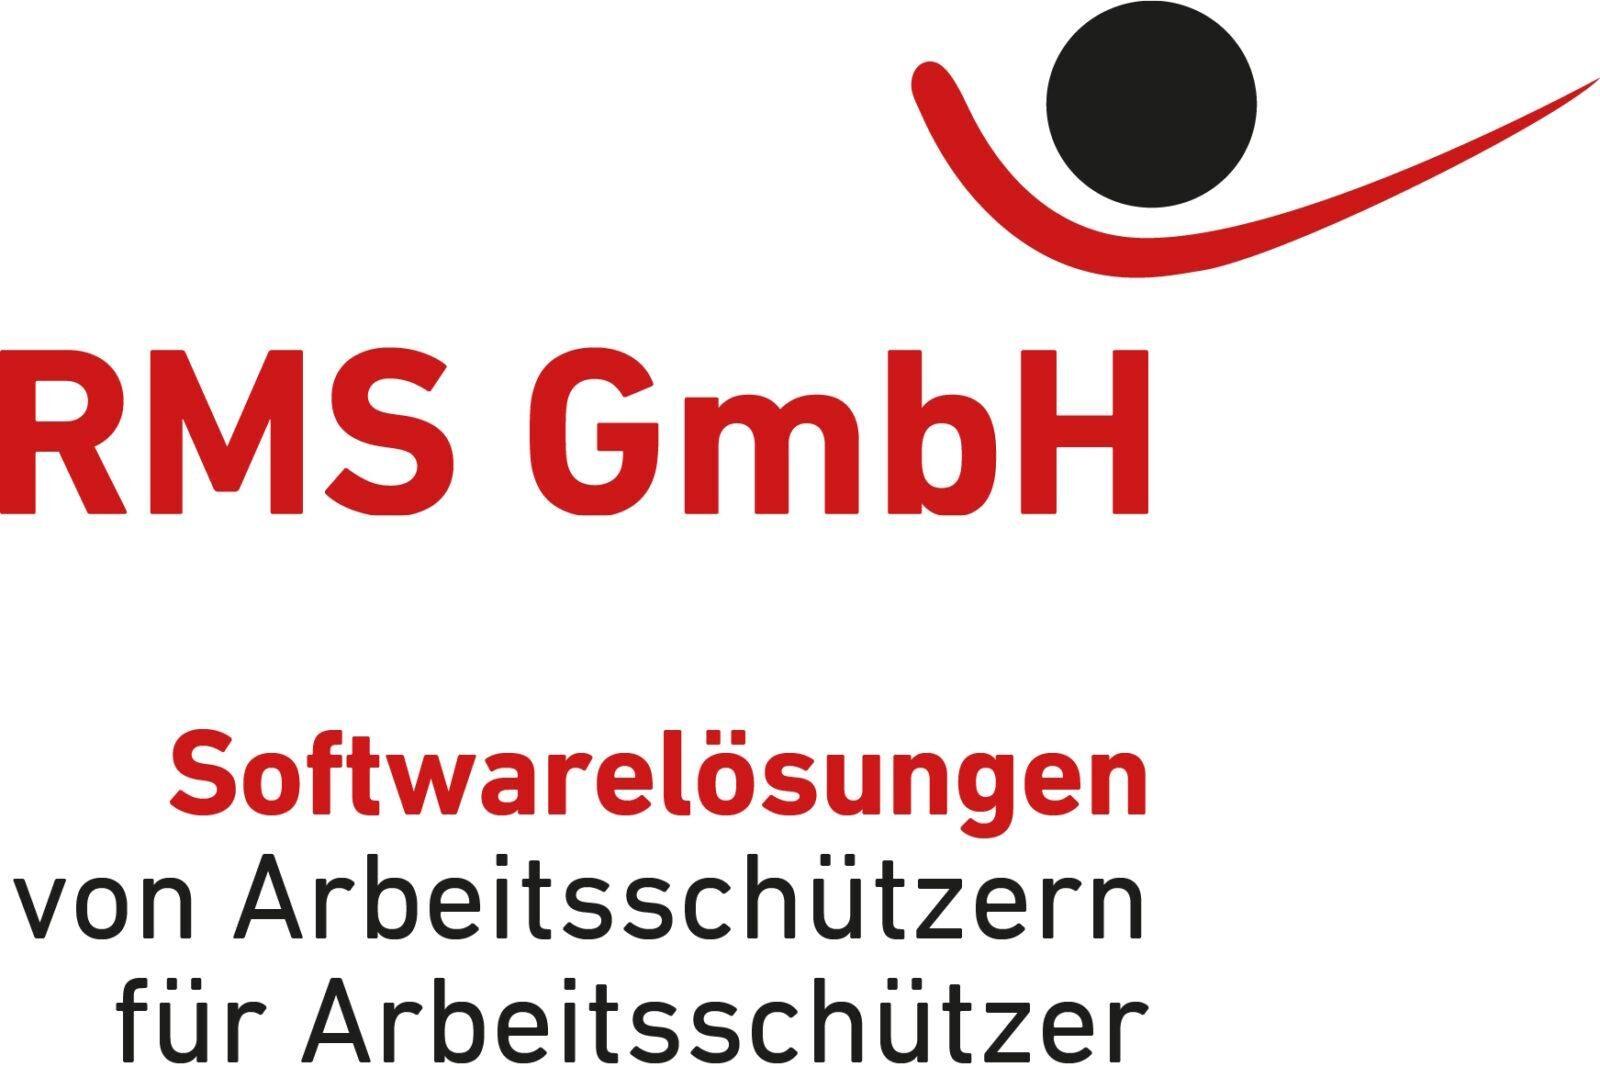 RMS GmbH – Risk Project